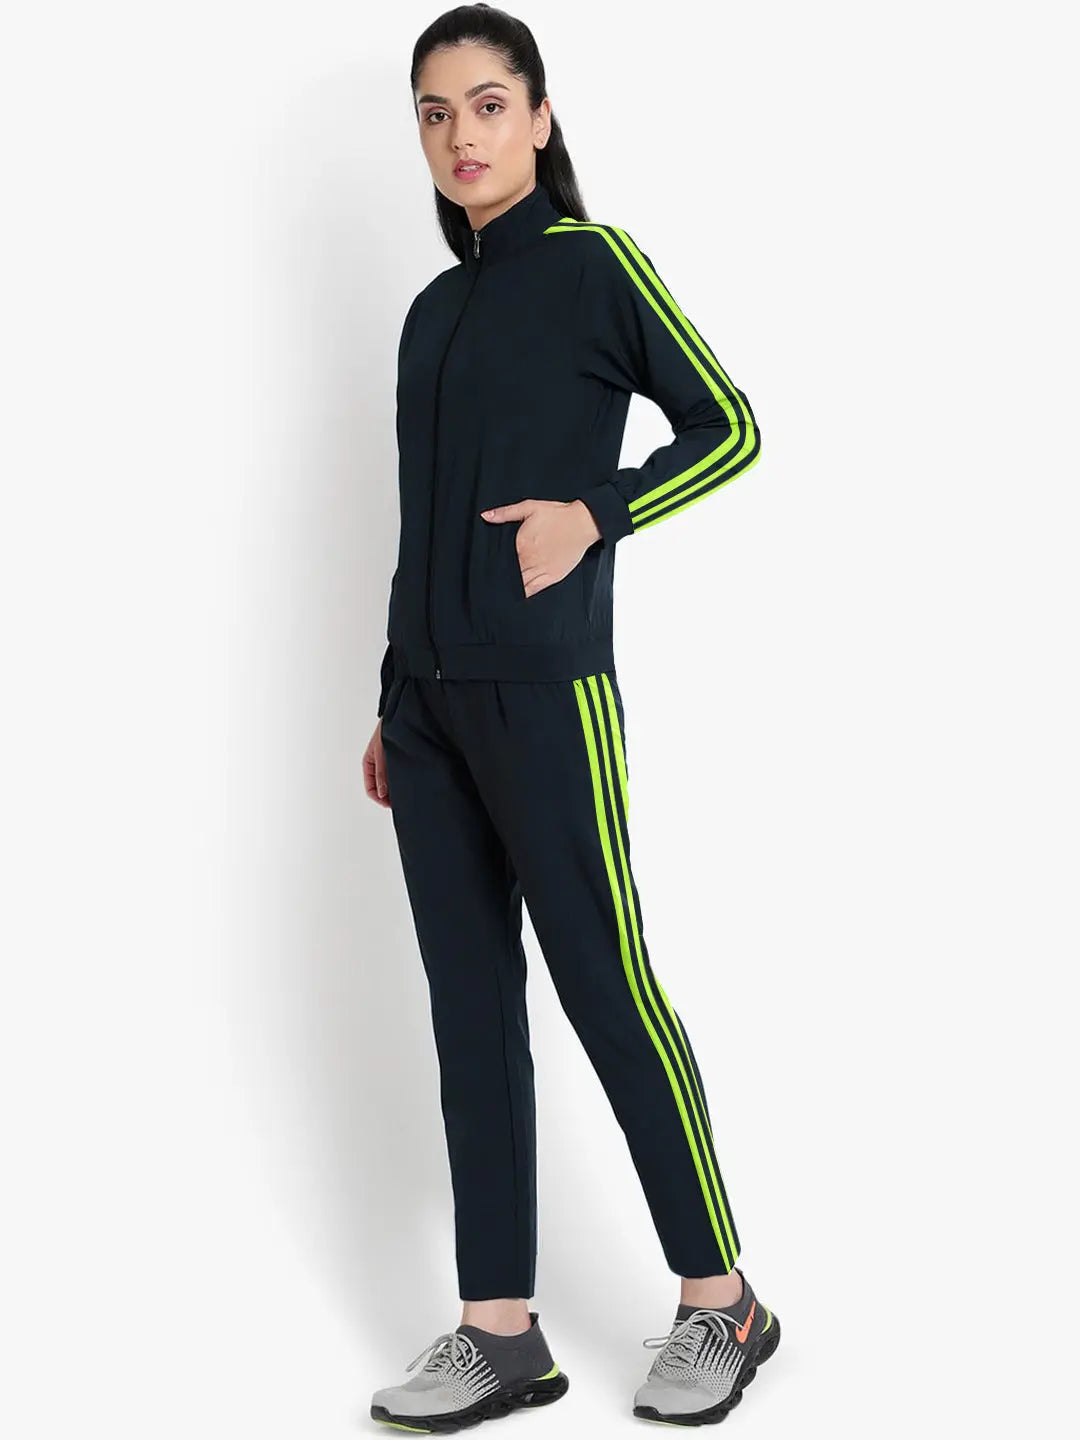 Louis Vicaci Fleece Zipper Tracksuit For Ladies Navy with Lime Green Stripe-SP252/RT2120